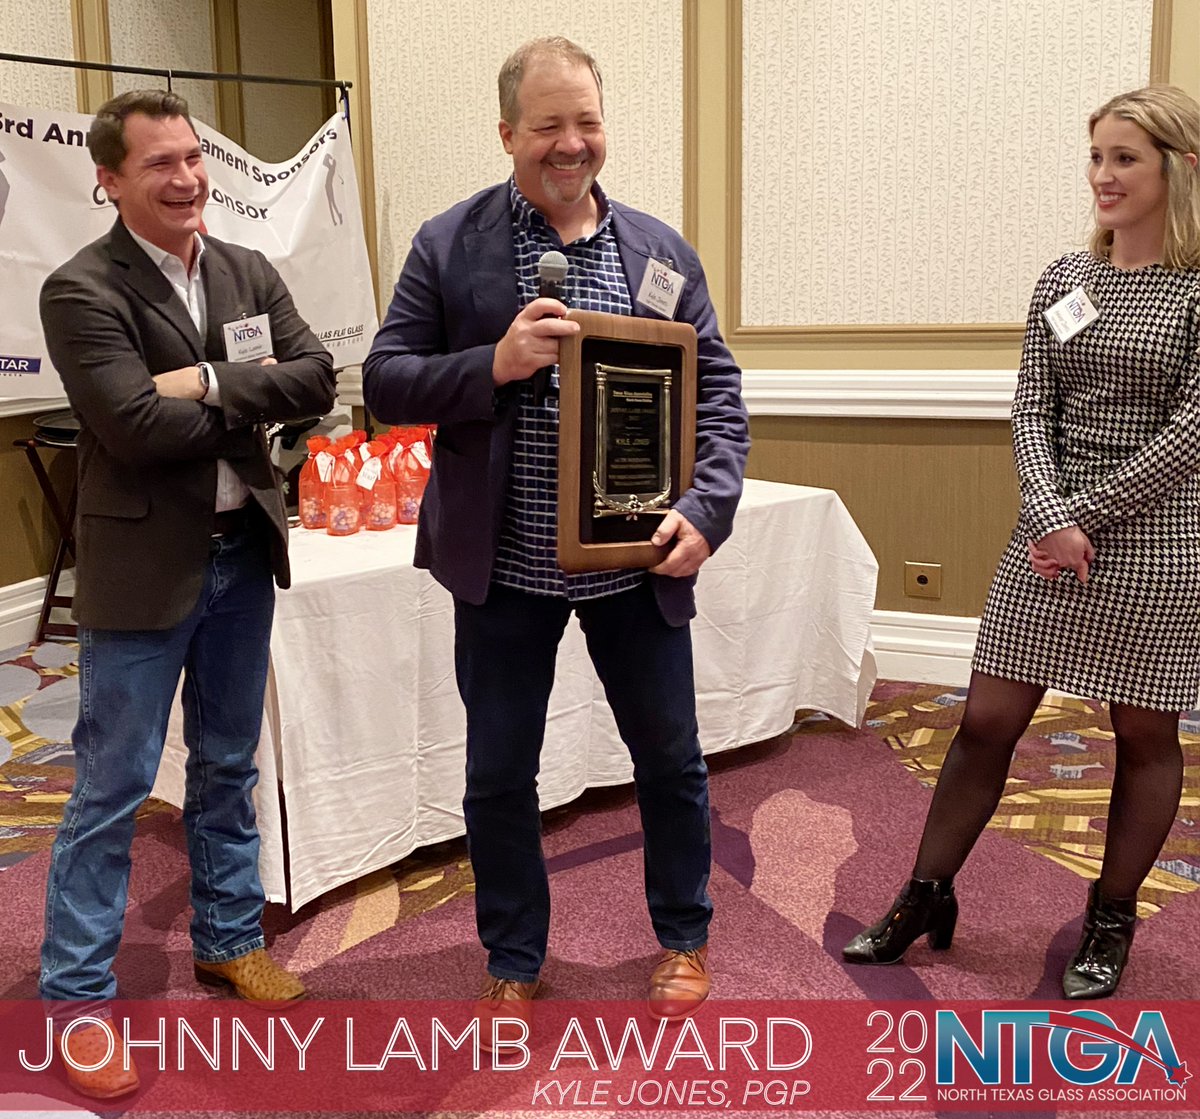 @PGPUSA is proud to announce that Kyle Jones received the 2022 Johnny Lamb Award. This award honors certain individuals that have gone above & beyond to benefit the industry. Thank you Kyle Jones for everything you do for glass and glazing industry!